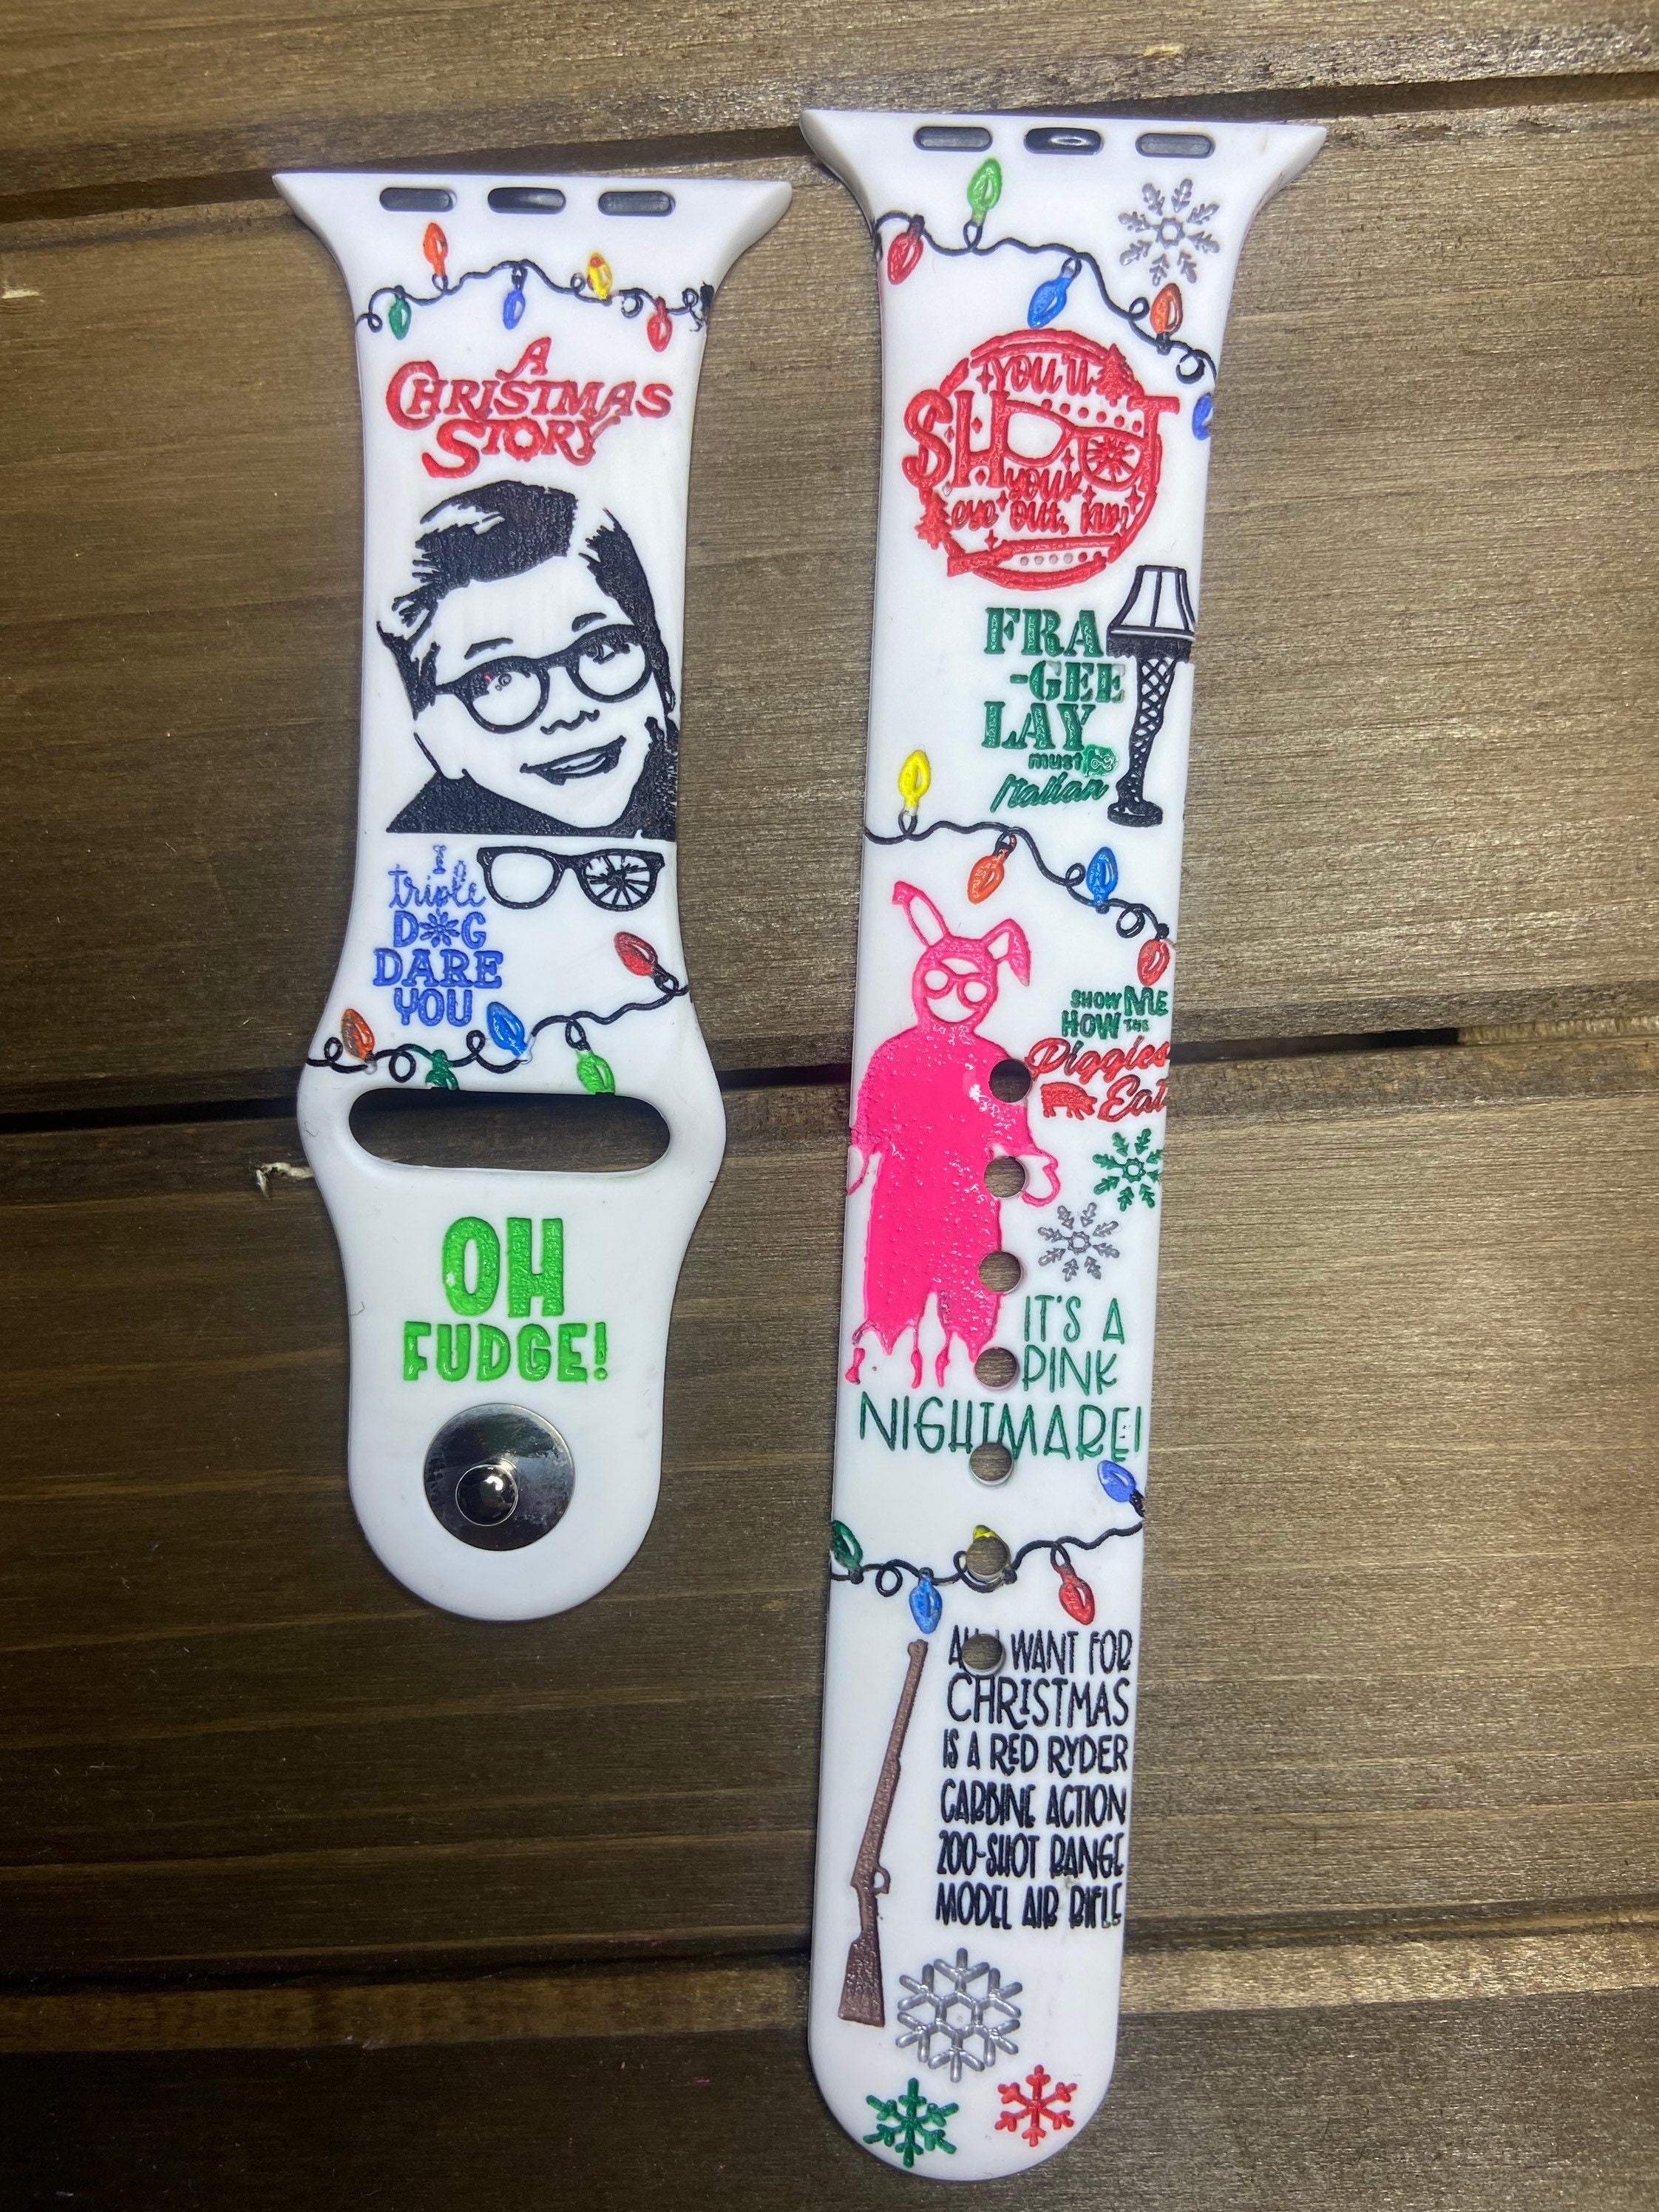 Christmas, Christmas theme, engraved Apple watch band, red Ryder, fall, sweater weather, Samsung, Fitbit Versa 2, Christmas story